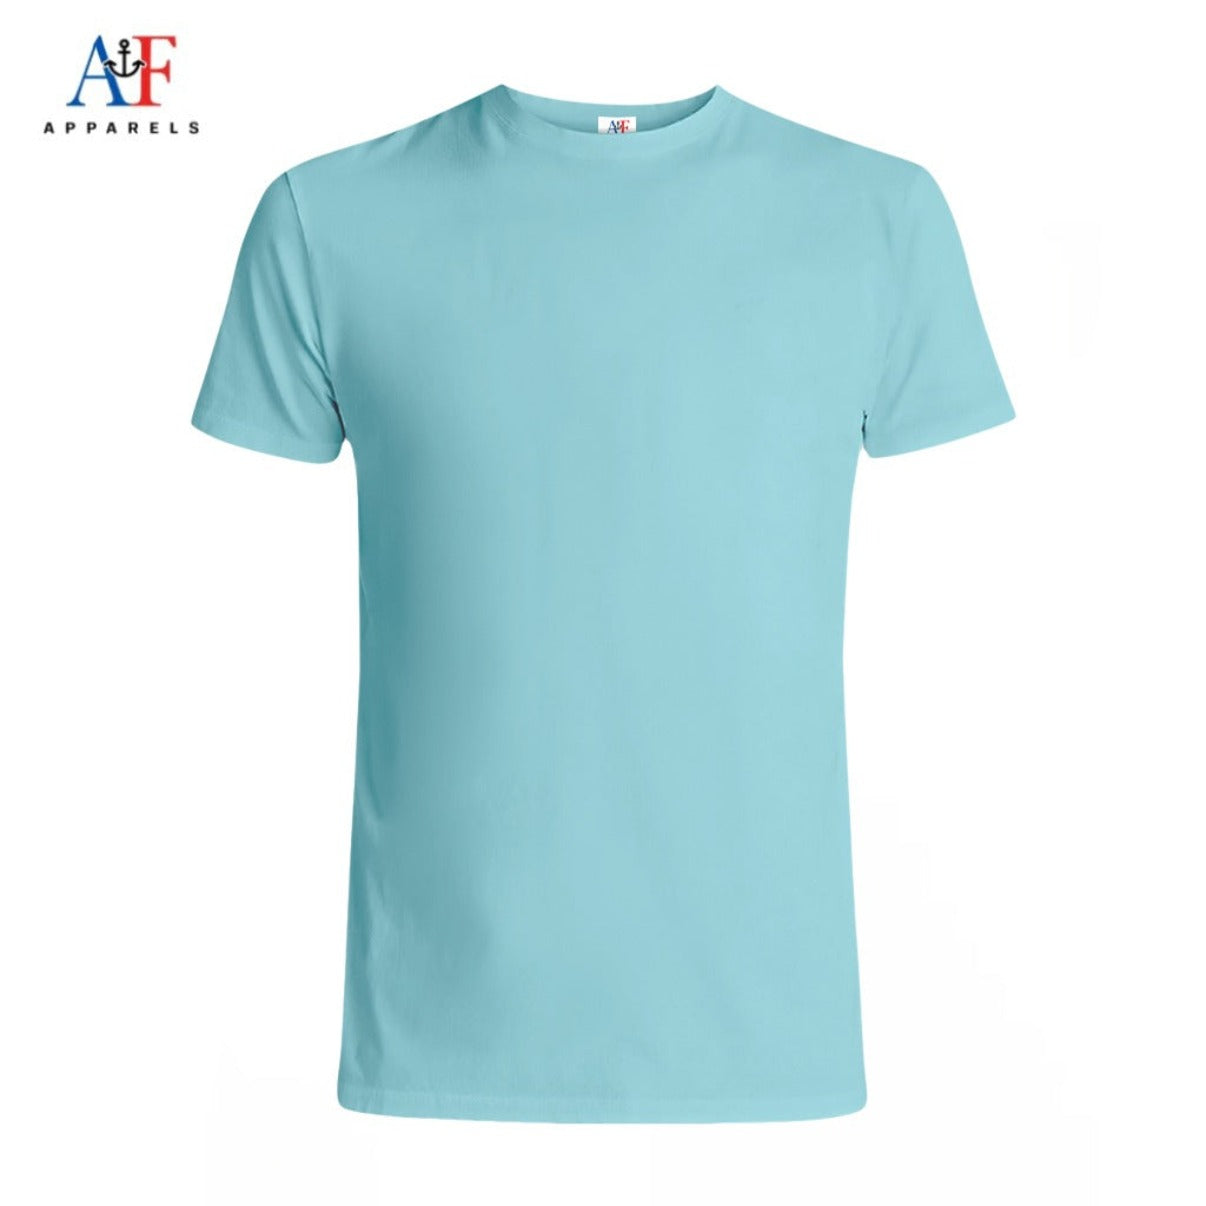 1001 Adult Value Tee 4.3 Oz - Pacific Blue Color (Most Popular Printers Tee) - AF APPARELS(USA)